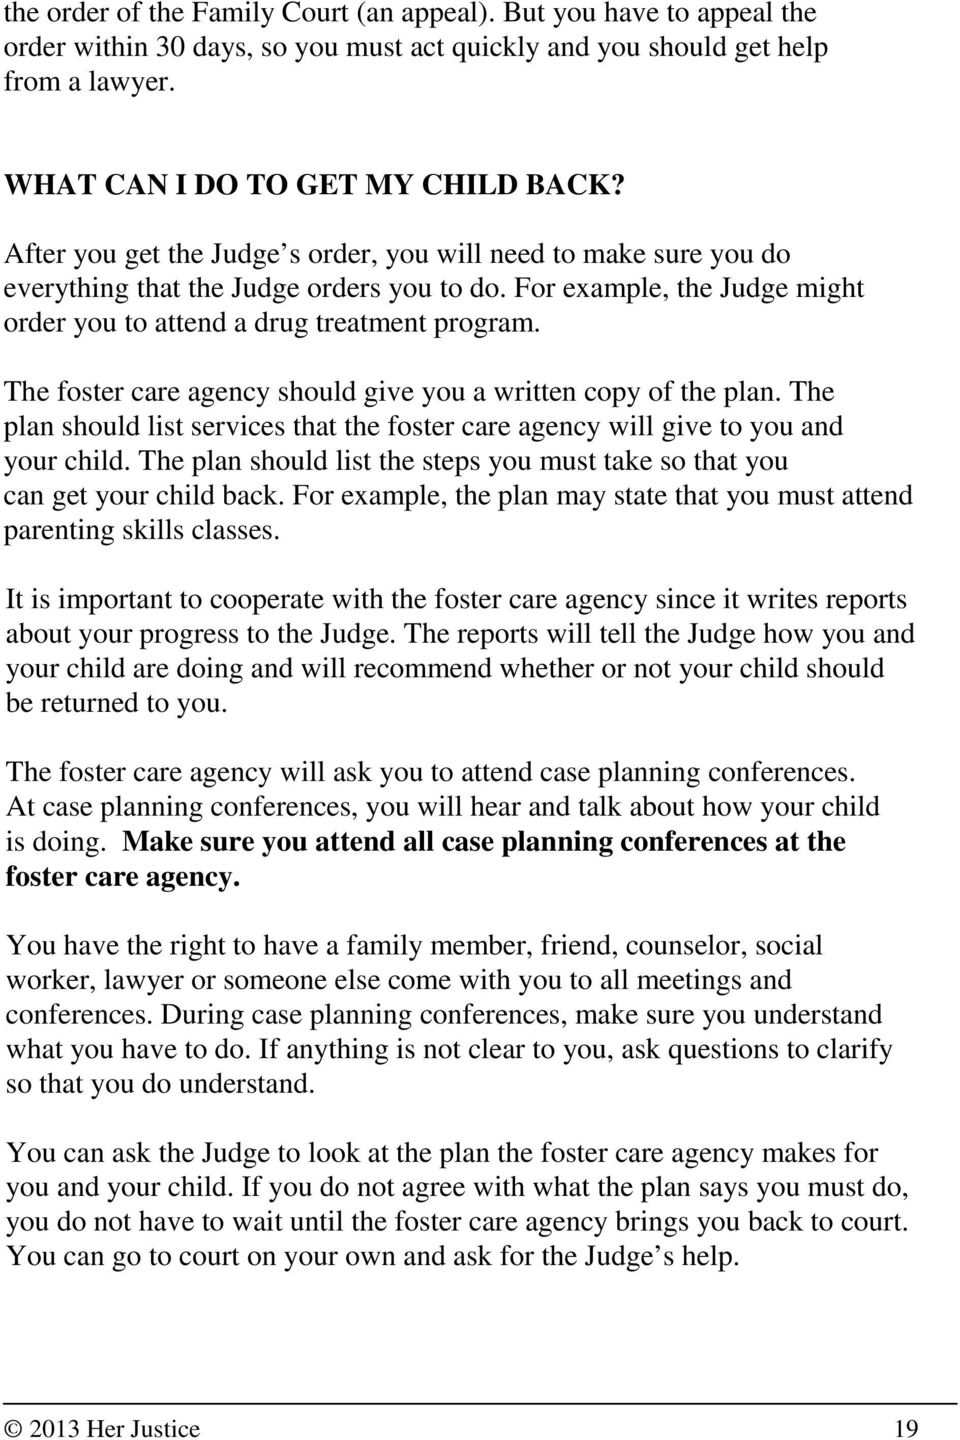 The foster care agency should give you a written copy of the plan. The plan should list services that the foster care agency will give to you and your child.